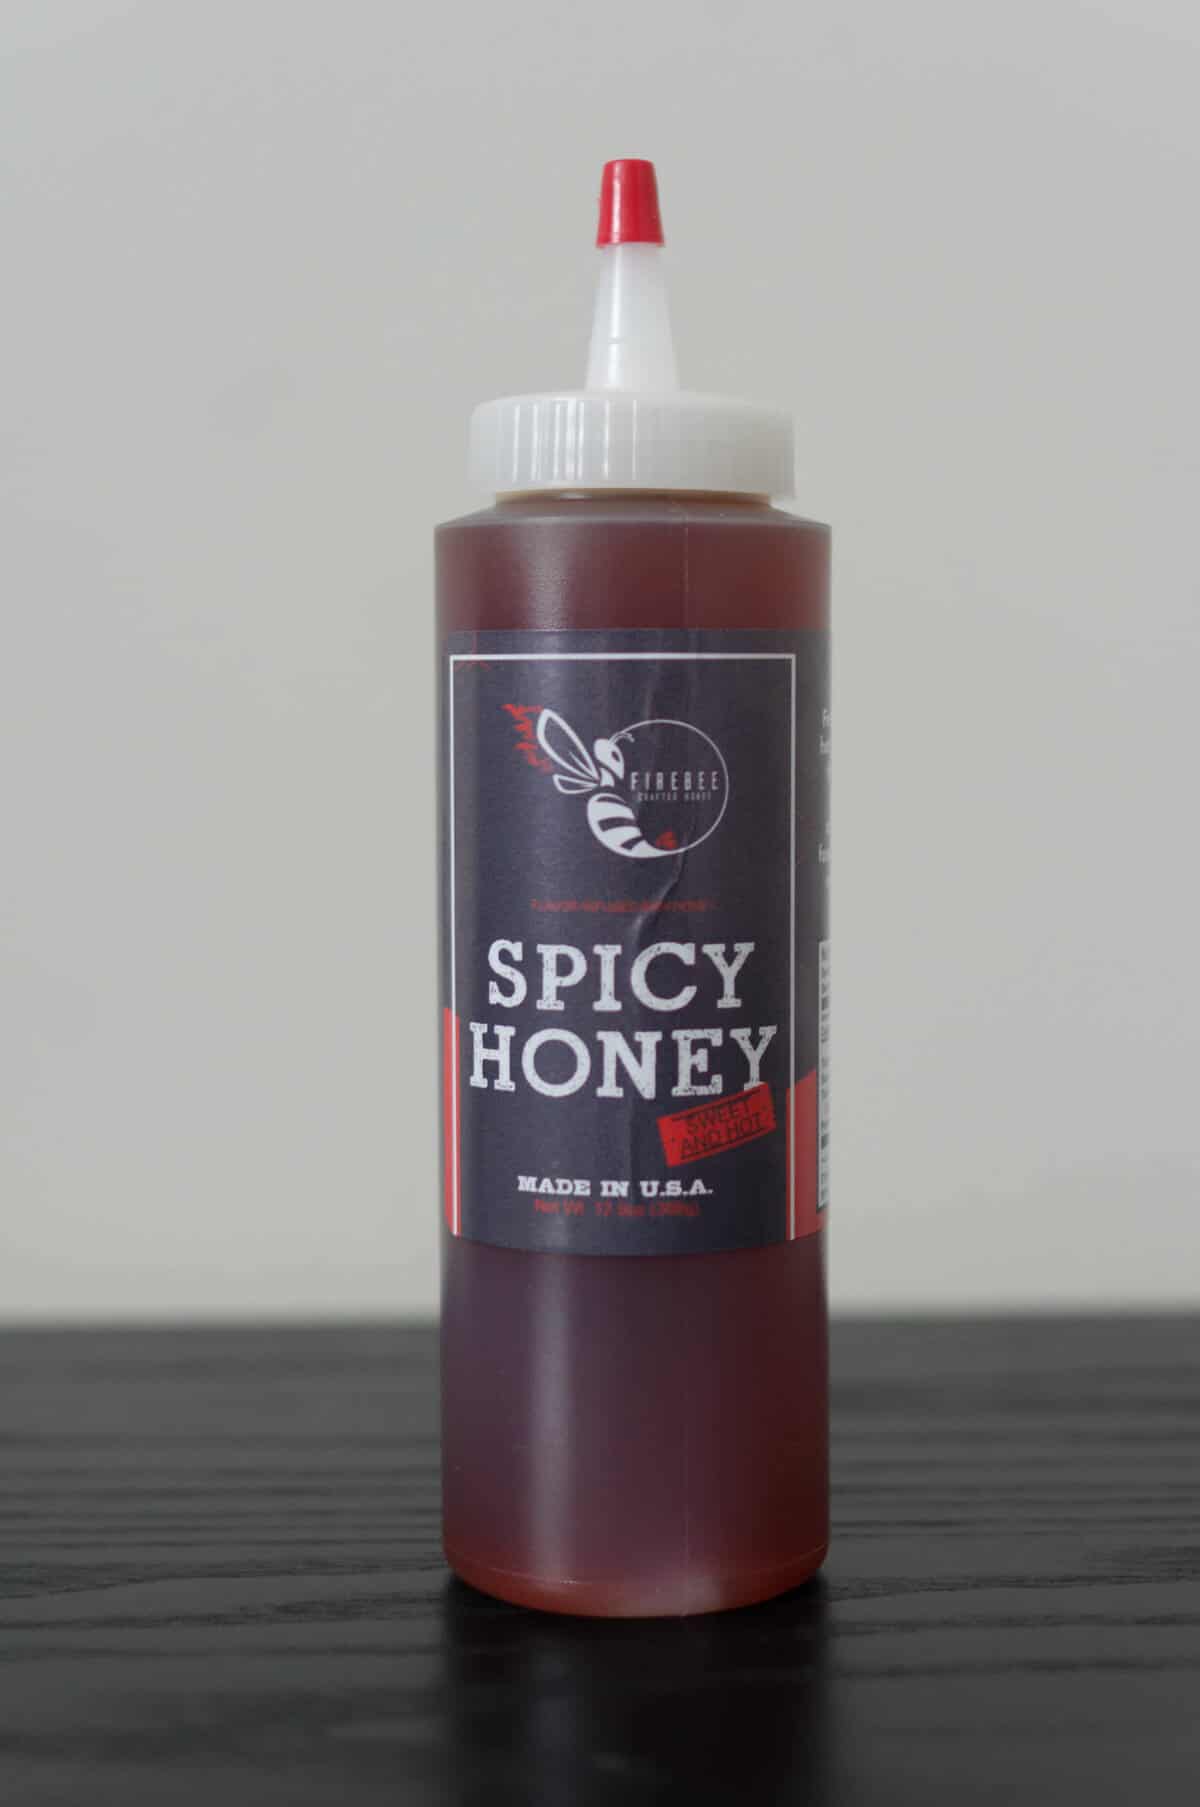 Firebee Spicy Honey 12.9oz Bottle, TheHoneyReview